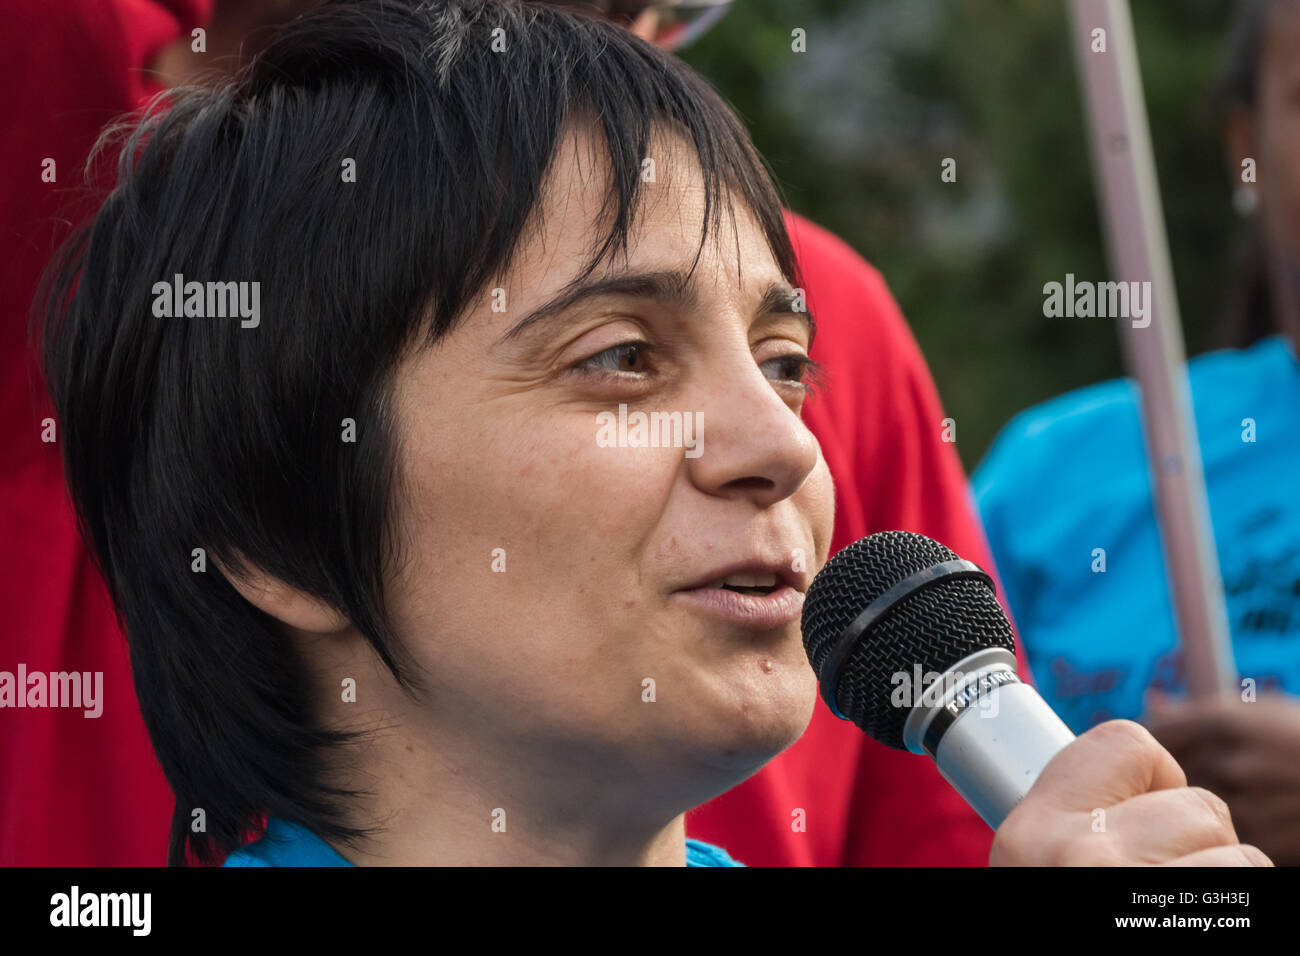 London, UK. June 24th 2016. Anna Pichierri of Movement For Justice By Any Means Necessary speaks at the rally in Altab Ali Park on the day after the UK voted to leave the EU against racism, for migrant rights and against fascist violence. They say that migration and immigrants have been attacked and scapegoated not only by both Remain and Leave campaigns but by mainstream parties and media over more than 20 years, stoking up hatred by insisting immigrants are a 'problem'.Peter Marshall/Alamy Live News Stock Photo